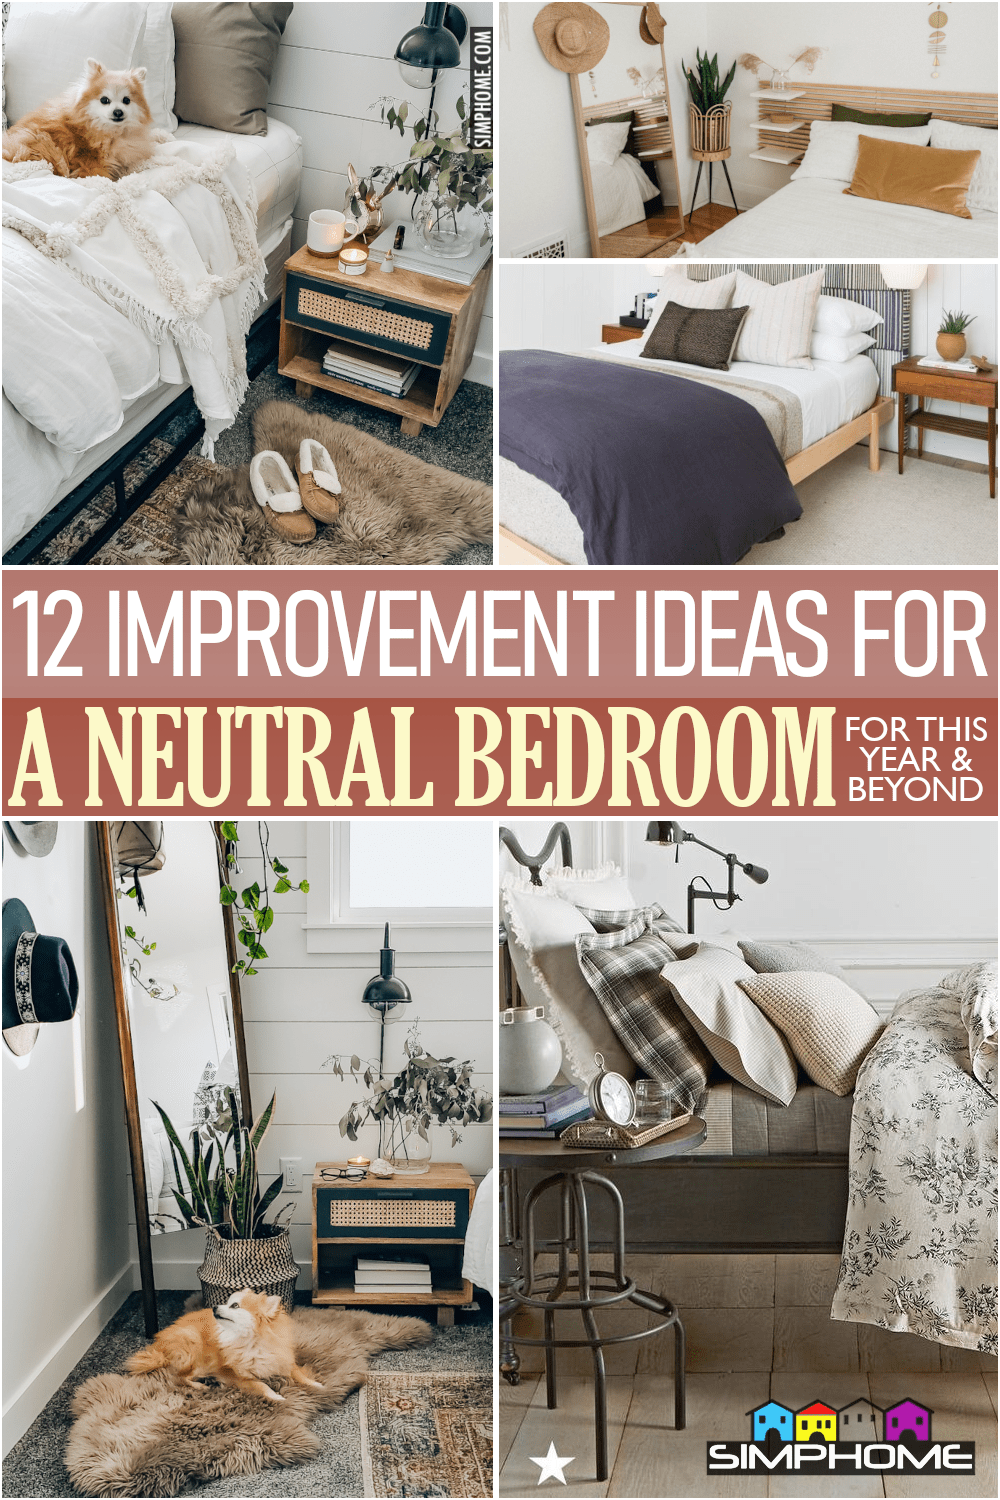 12 Improvement Ideas for a Neutral Bedroom via Simphome.comFeatured